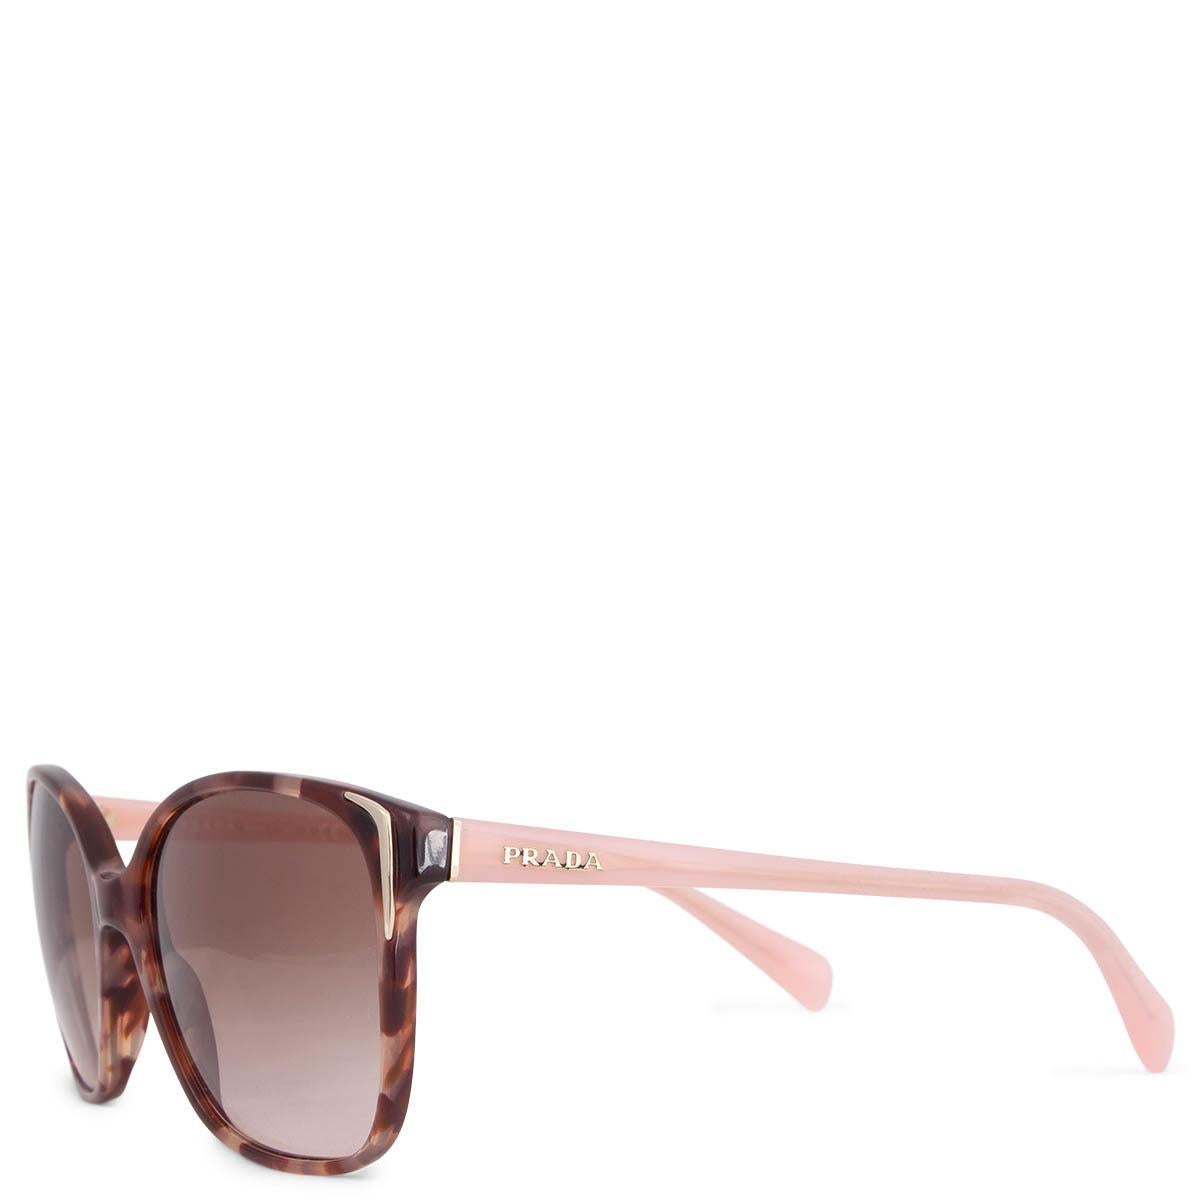 100% authentic Prada SPR 010 oval sunglasses in brown and light rose tortoiseshell acetate with light rose temples and brown gradient lenses. Have been worn and are in excellent condition. Come with case. 

Measurements
Model	SPR 010
Width	14cm